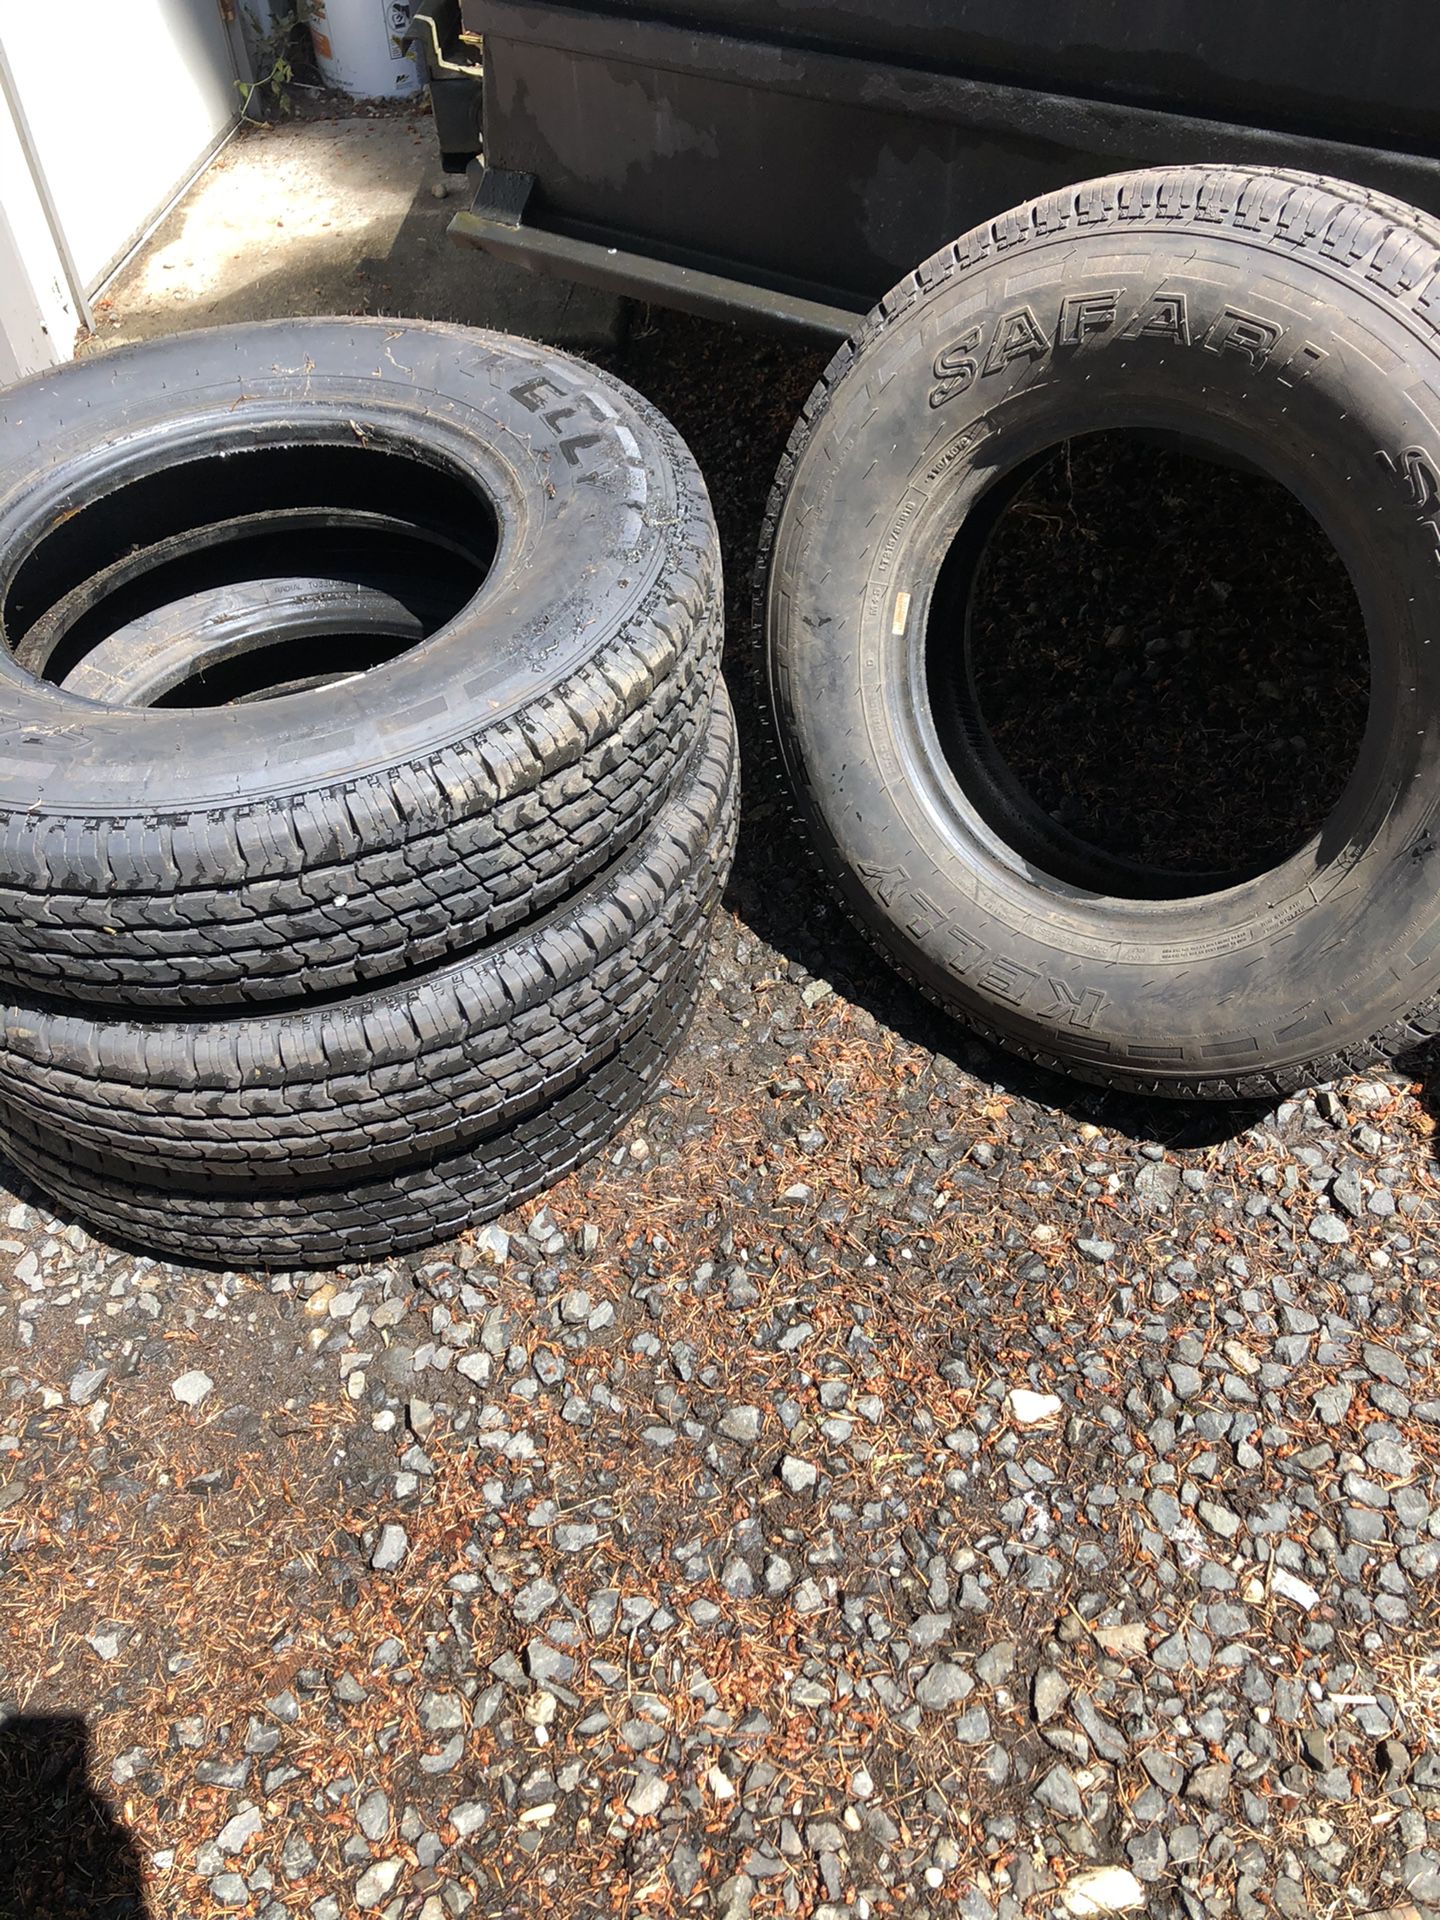 Kelly safari heavy duty 16” light truck/trailer tires weight rating 2335lb per tire. Less than 100 miles on them. They’ve been stored in our shop.